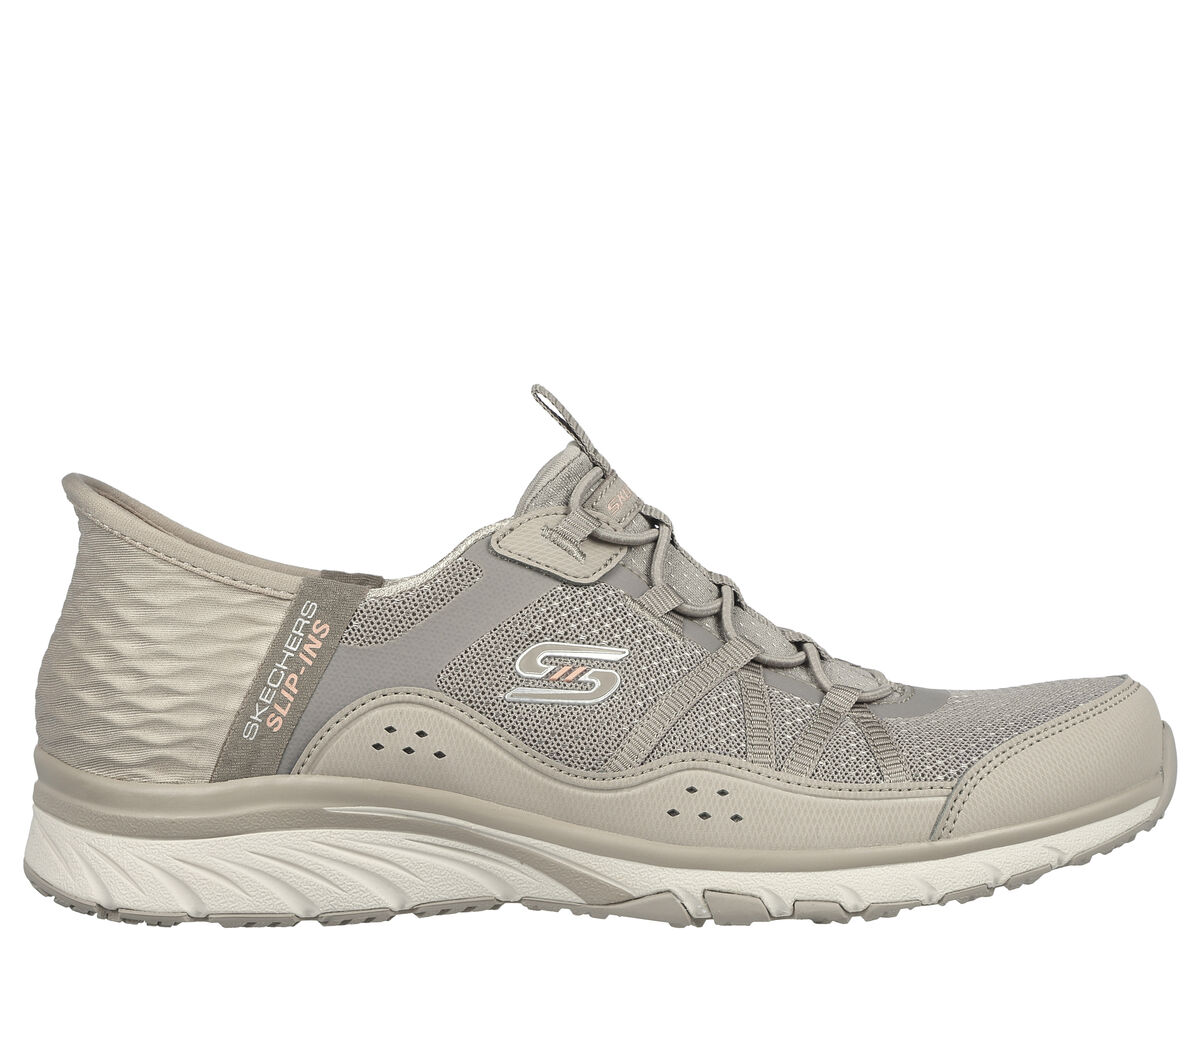 Compra online ZAPATILLAS CASUAL MUJER SKECHERS 177288 TAUPE